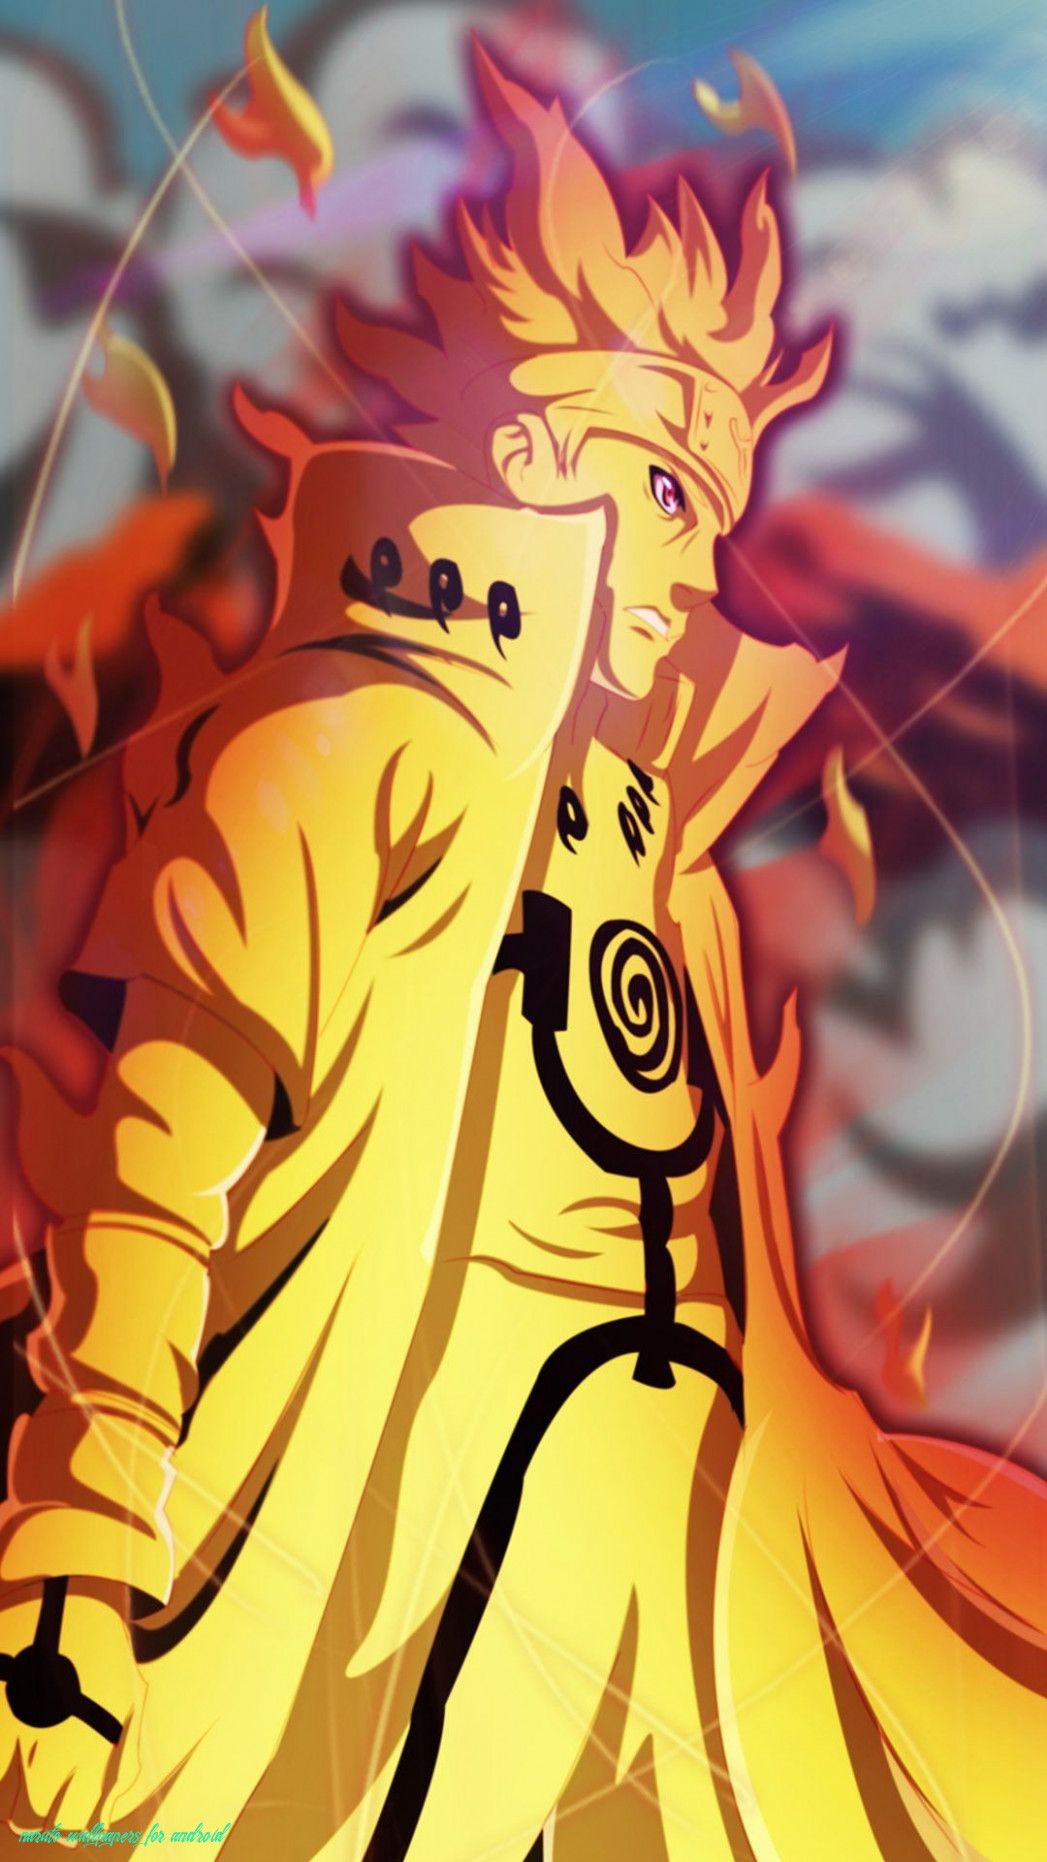 Small But Important Things To Observe In Naruto Wallpaper For Android. Naruto Wallpaper For An. Naruto mobile, Naruto phone wallpaper, Best naruto wallpaper